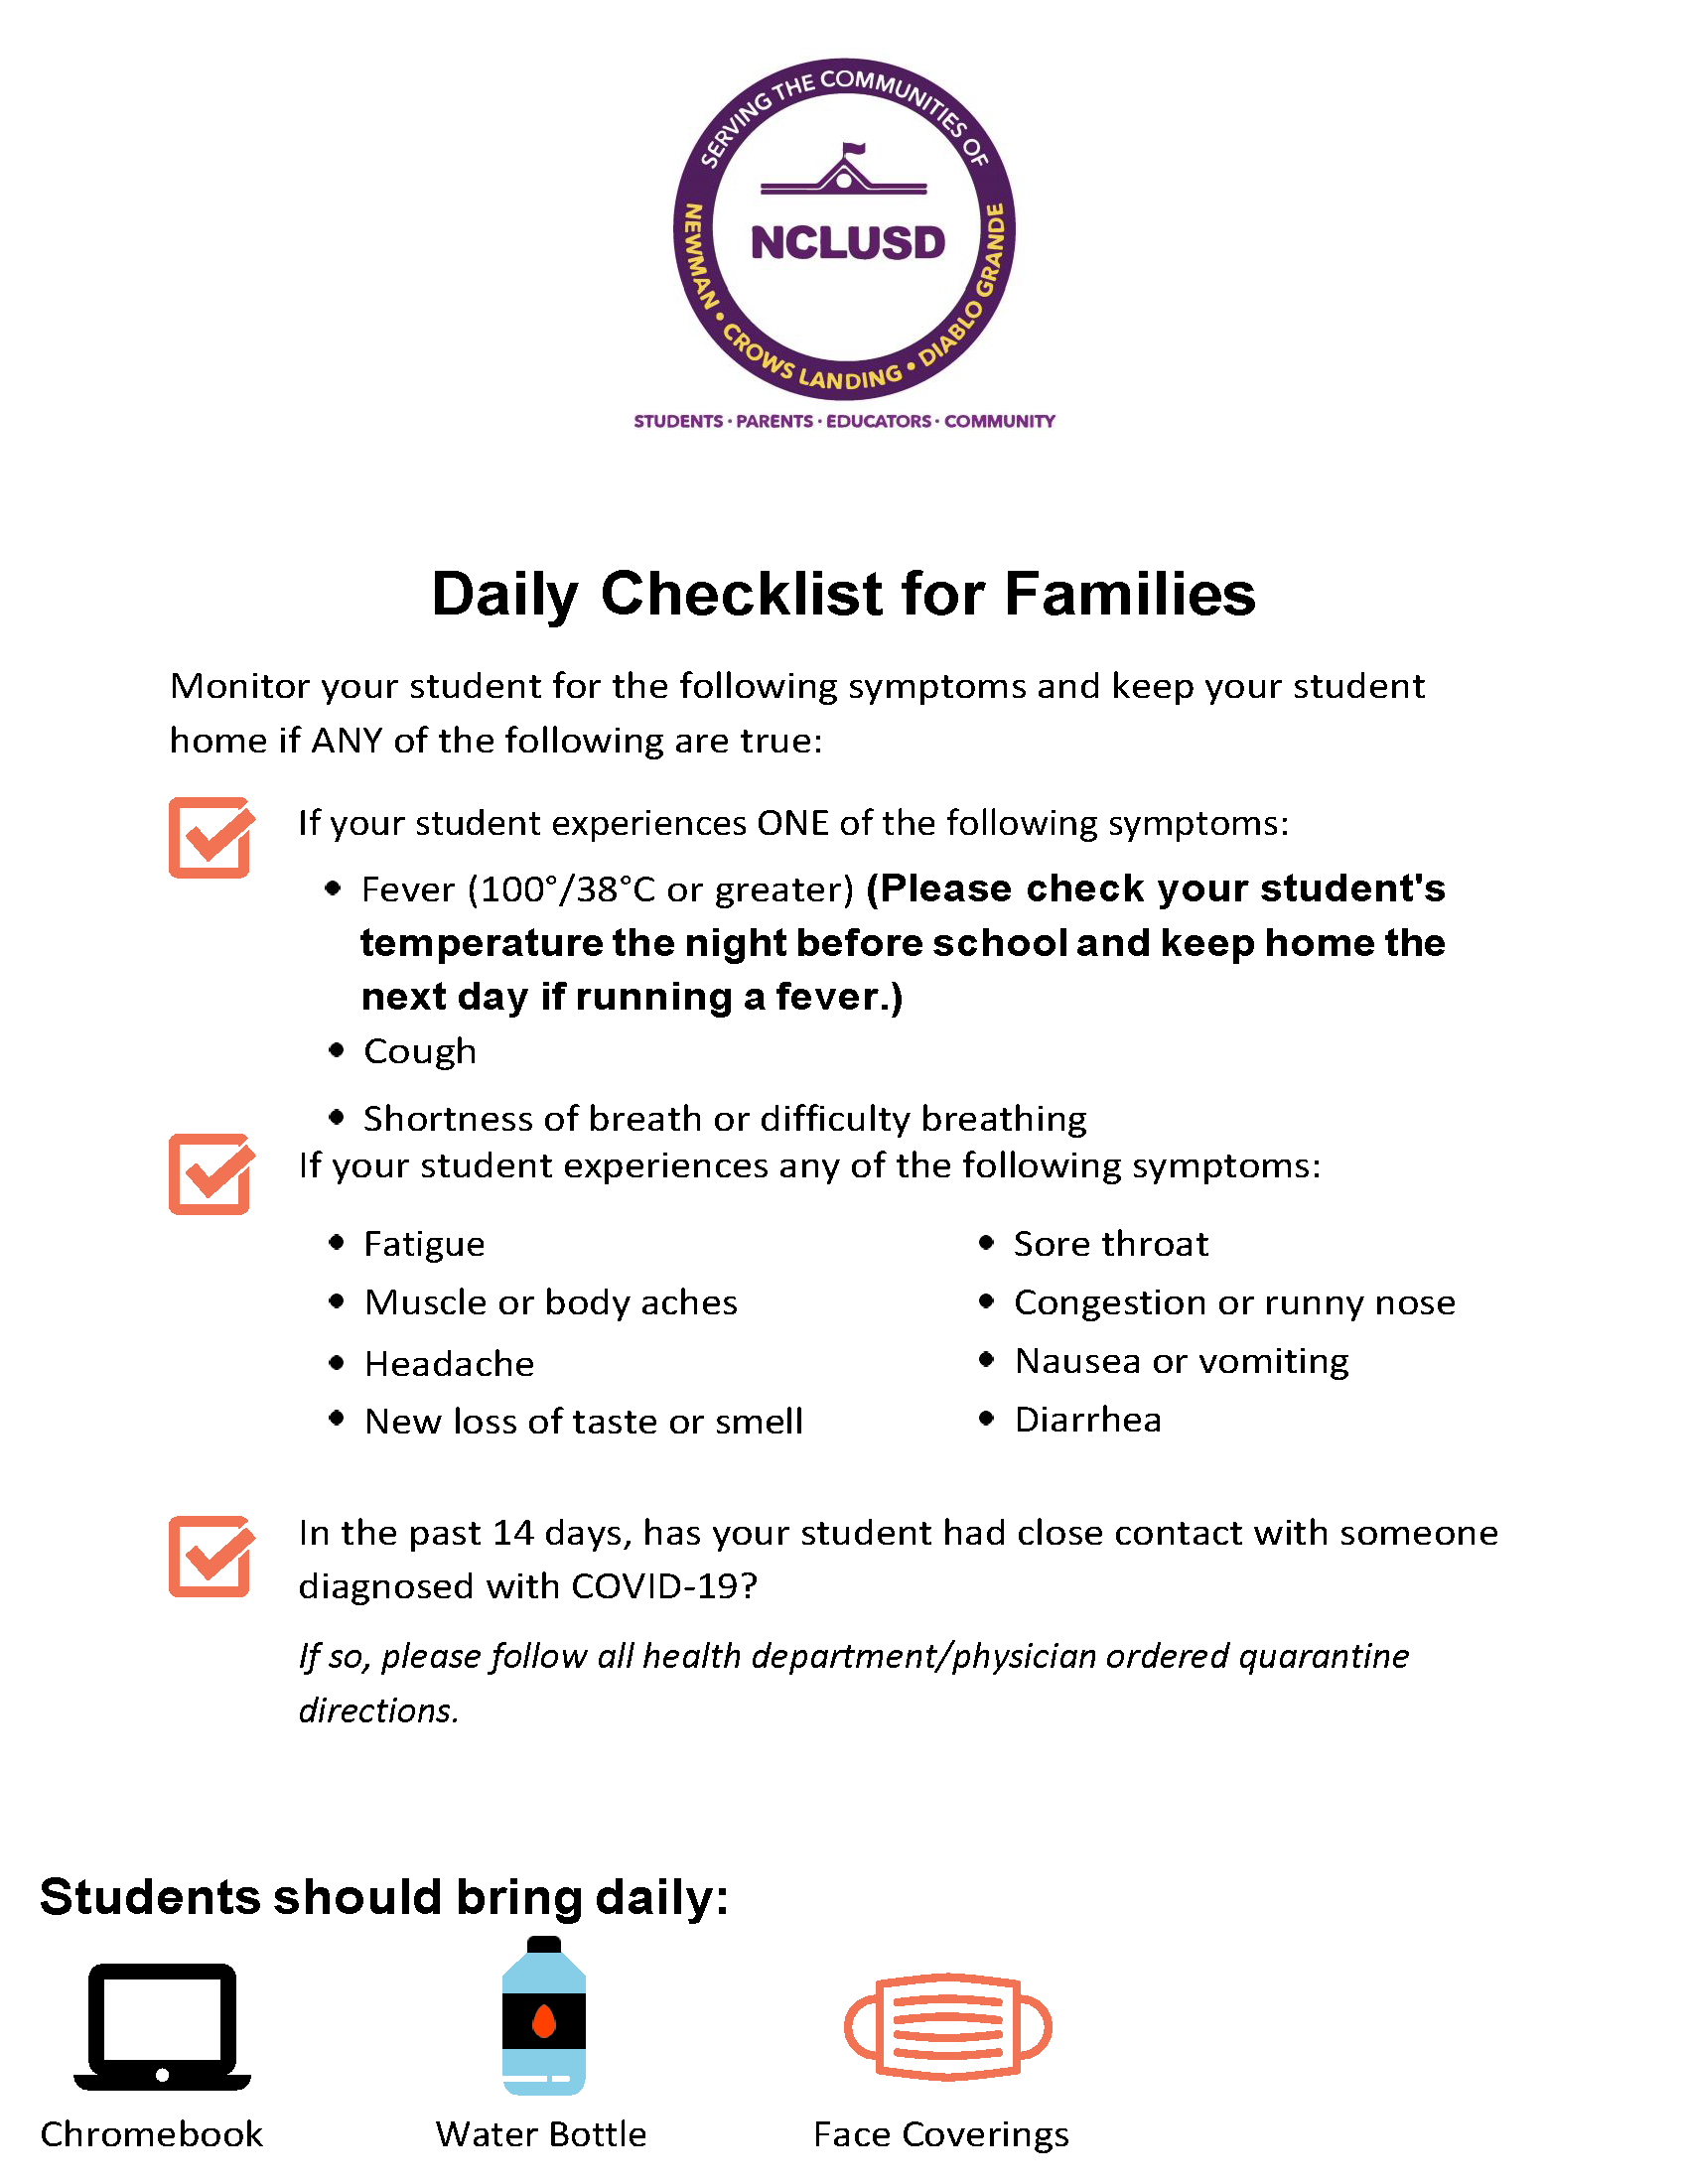 Daily Checklist for Families